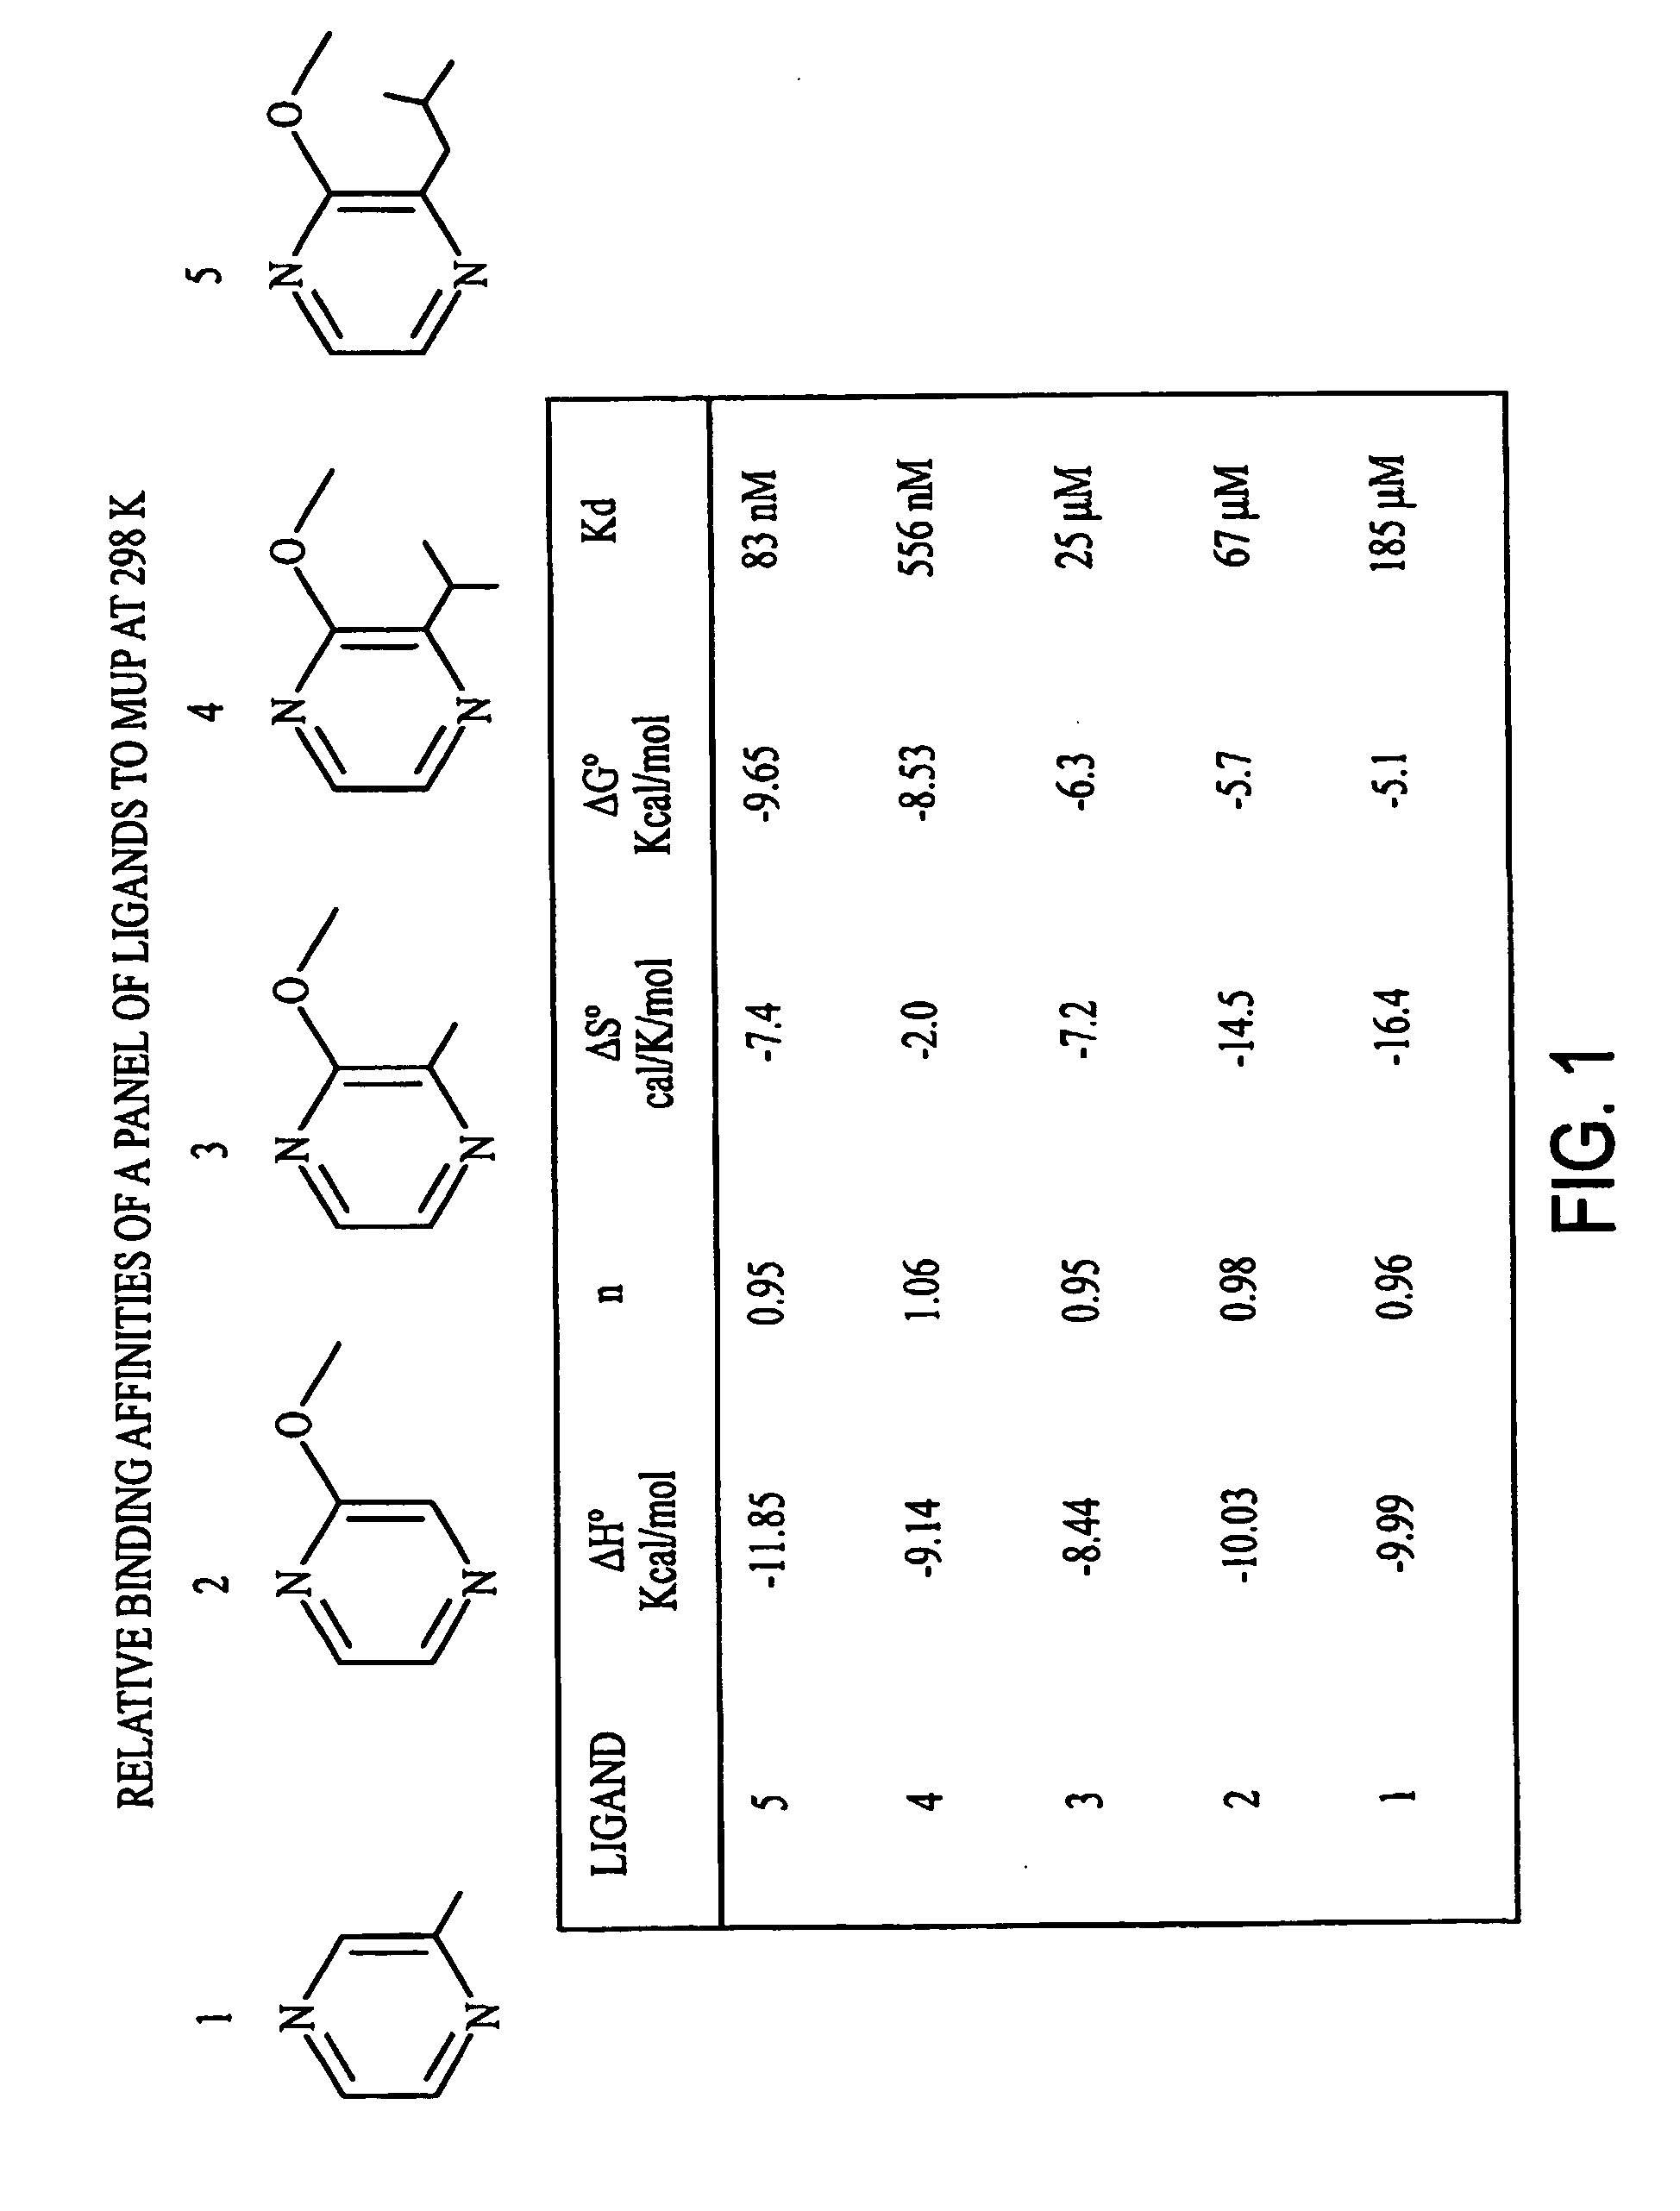 Method for obtaining dynamic and structural data pertaining to proteins and protein/ligand complexes